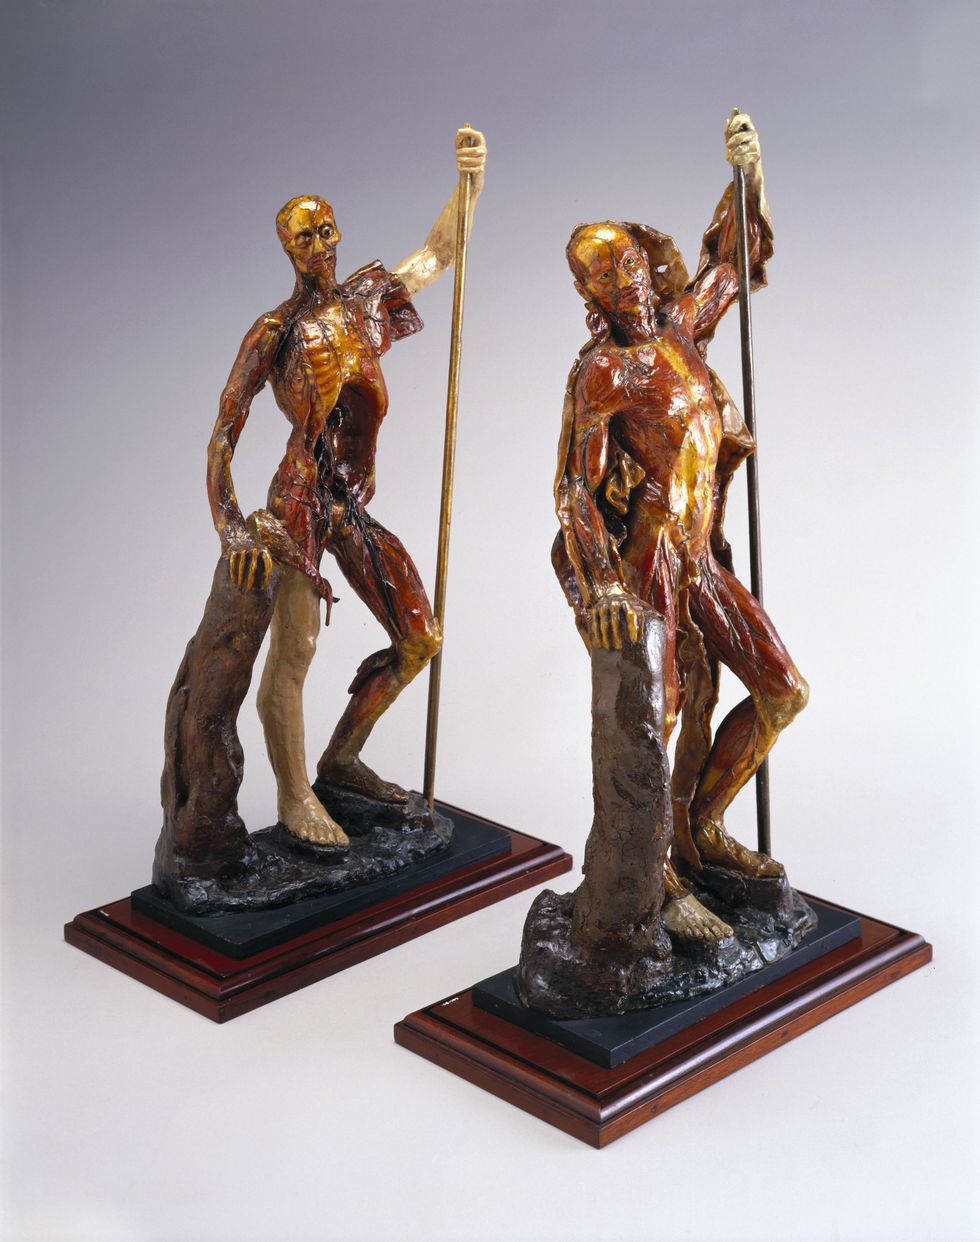 Two wax male anatomical figures, Italy, 1740-1780.